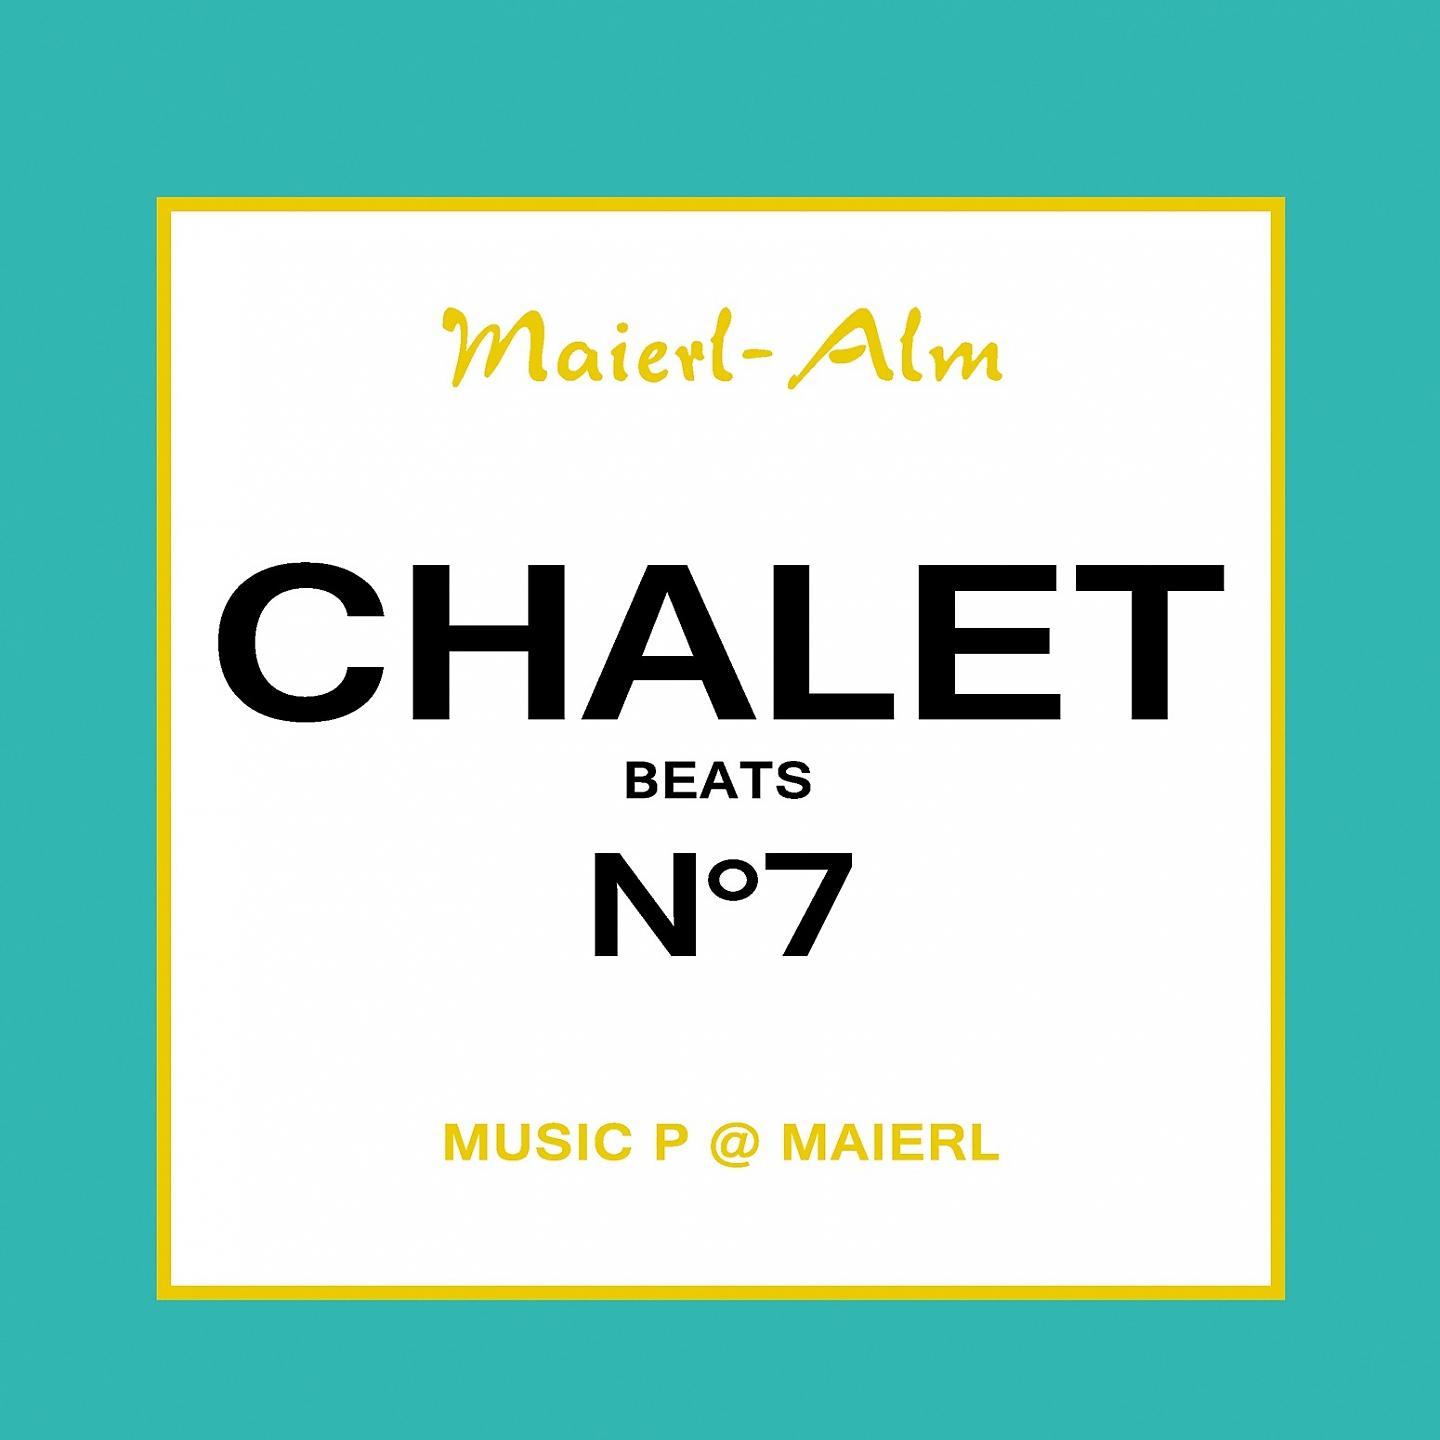 Постер альбома Chalet Beat No.7 - The Sound of Kitz Alps @ Maierl